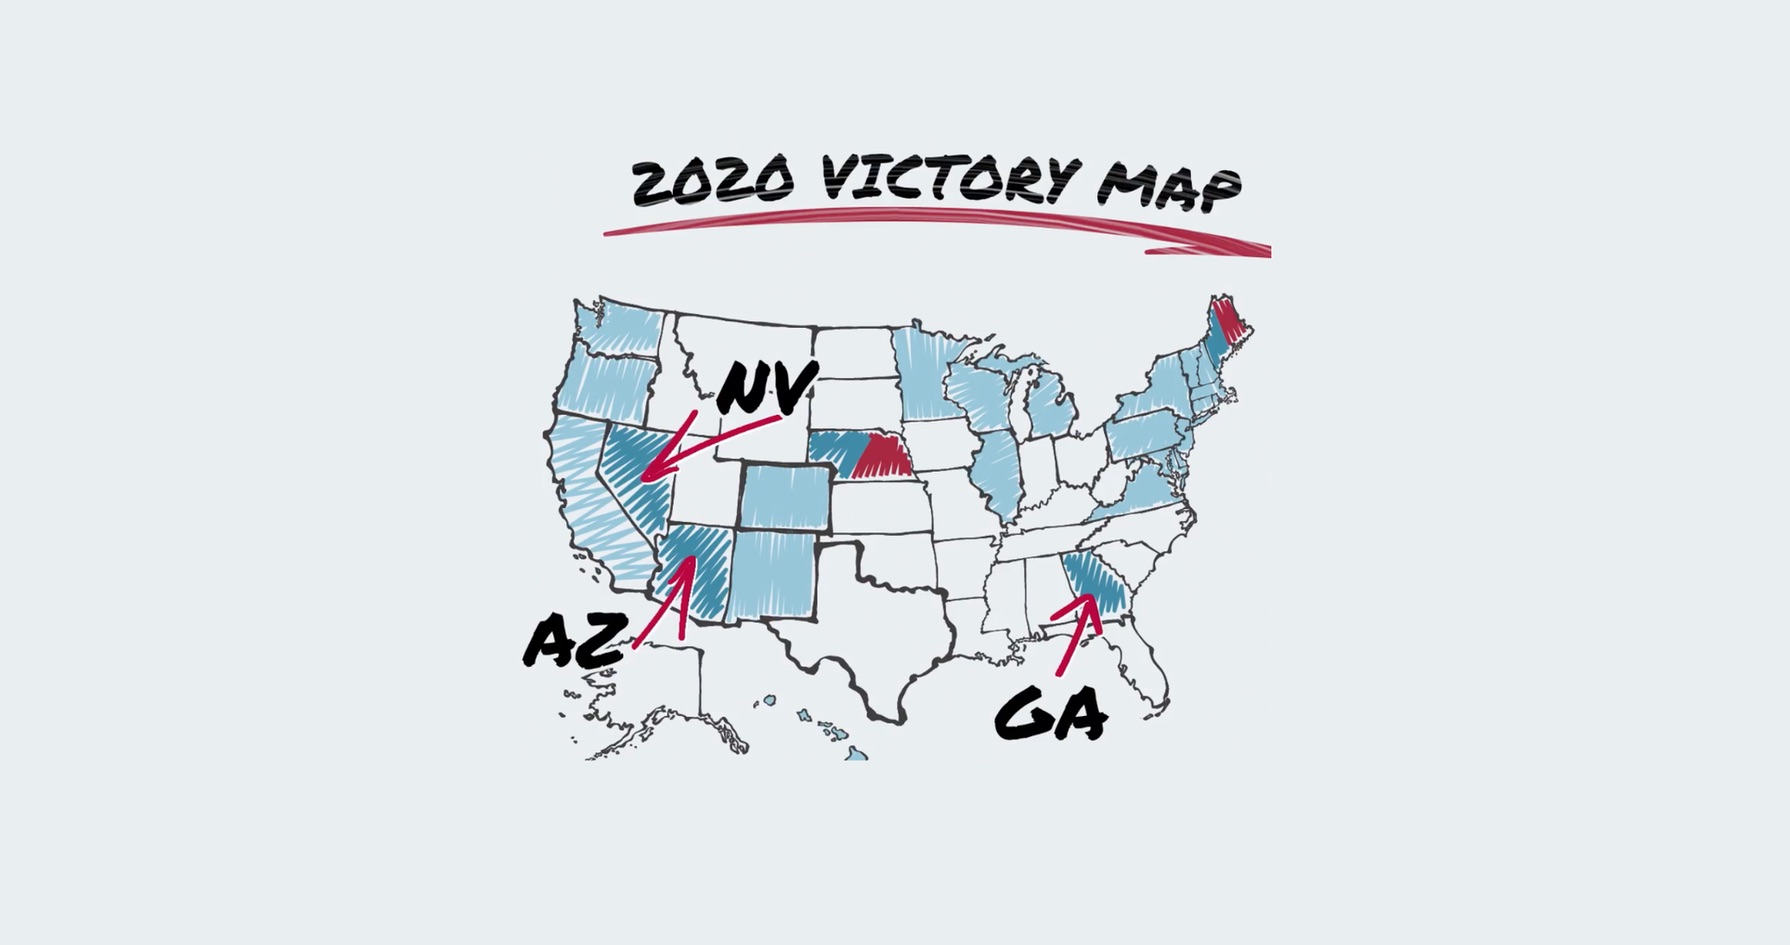 202 Victory Map - paths to victory